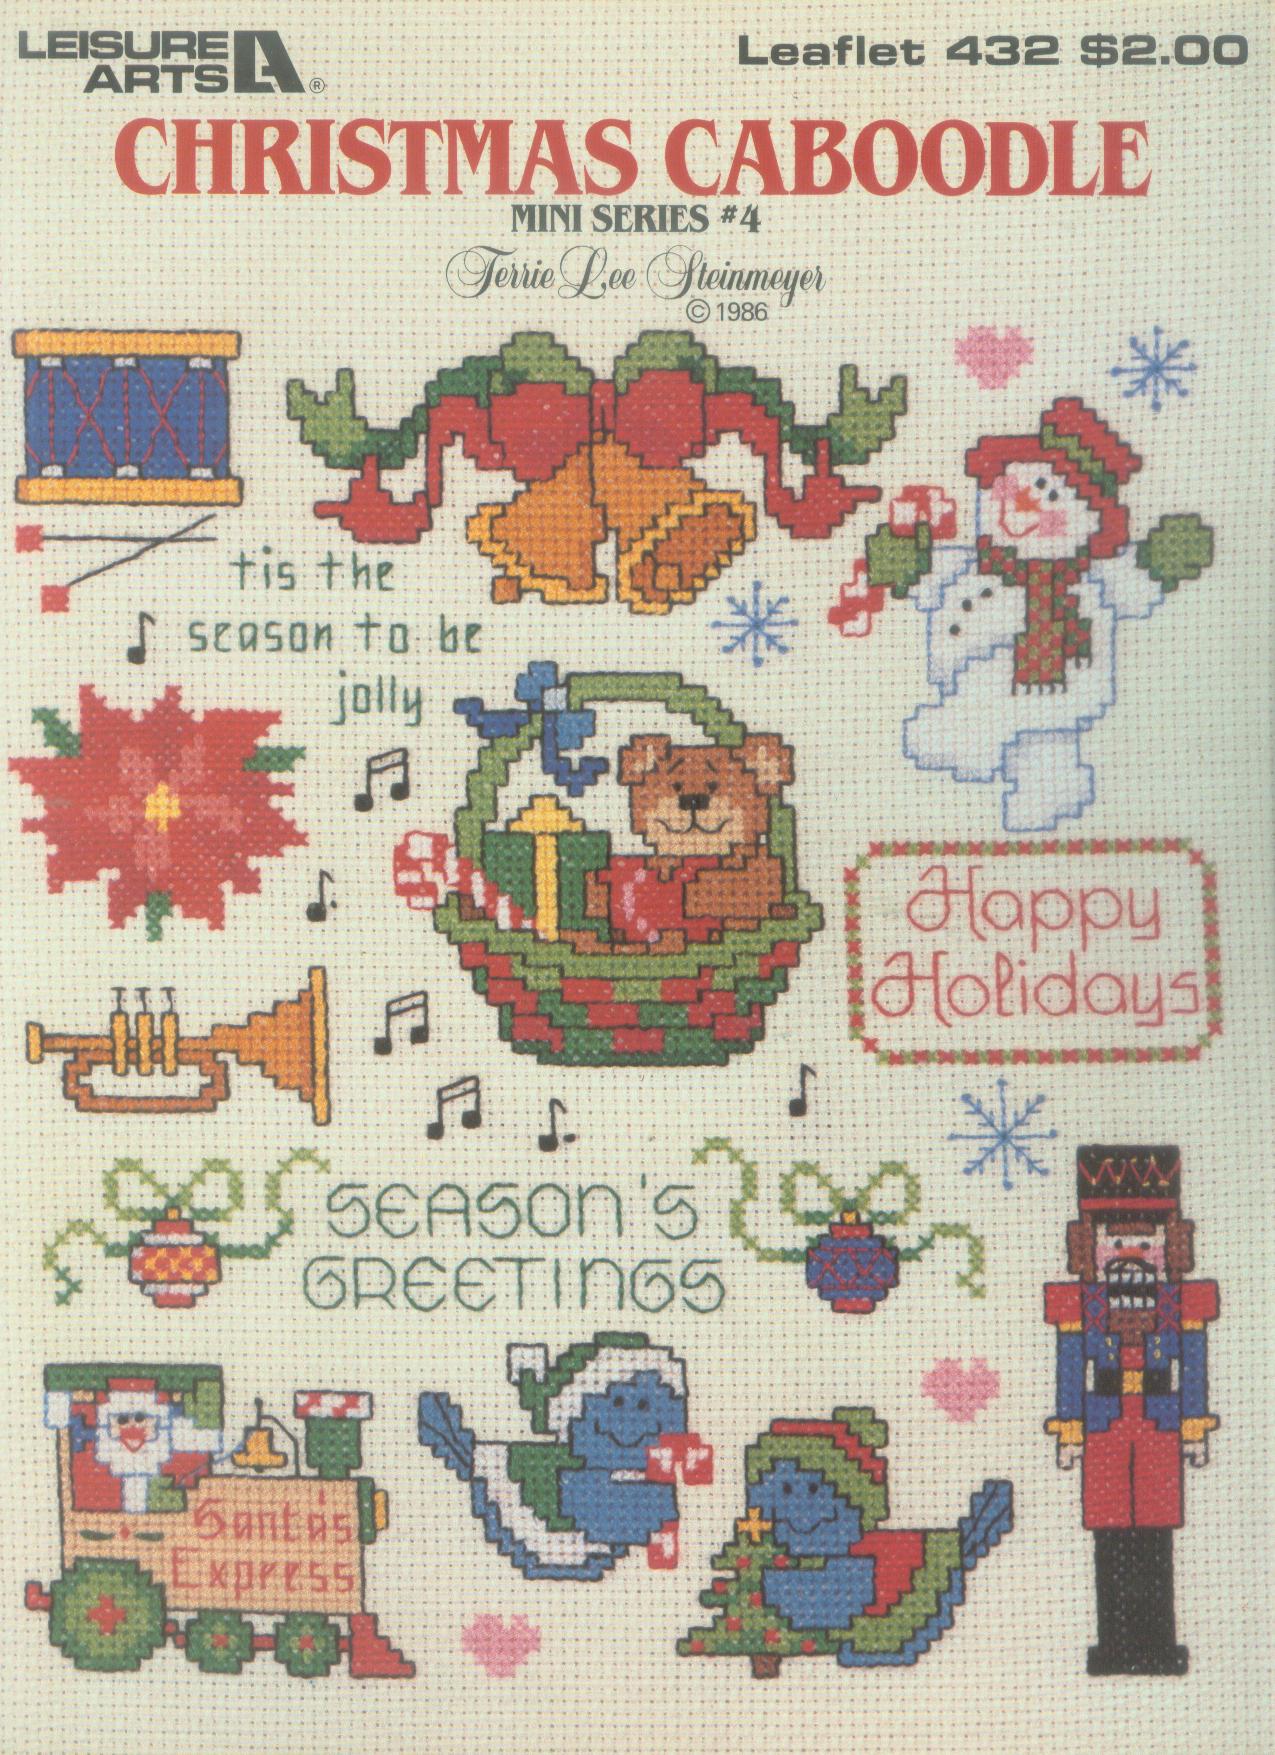 CHRISTMAS CUBBIES COUNTED CROSS STITCH LEAFLET #2217